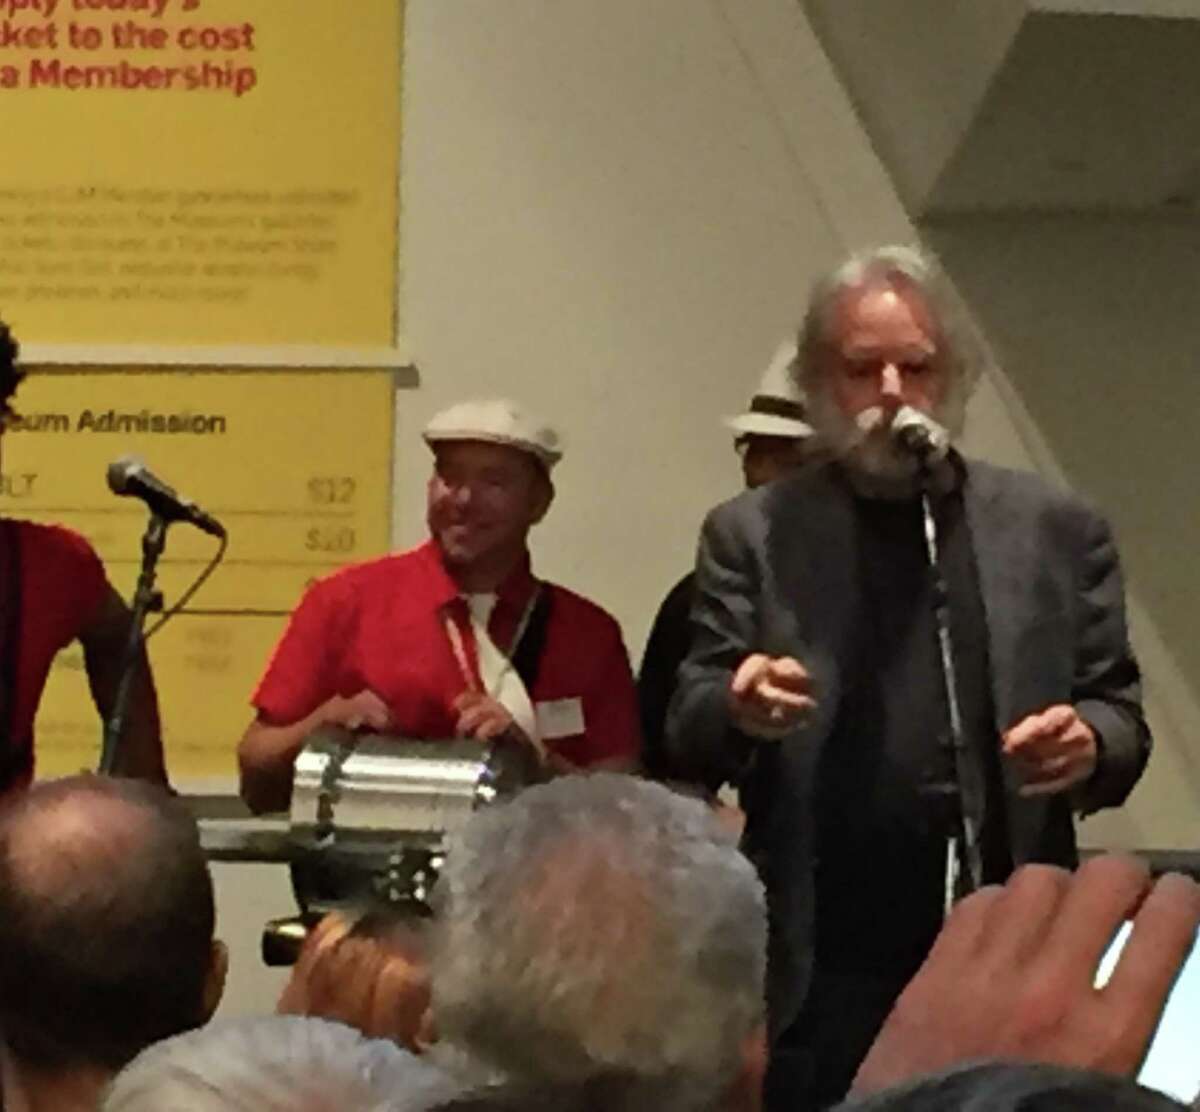 Bob Weir addresses crowd at Contemporary Jewish Museum opening of Bill Graham exhibition